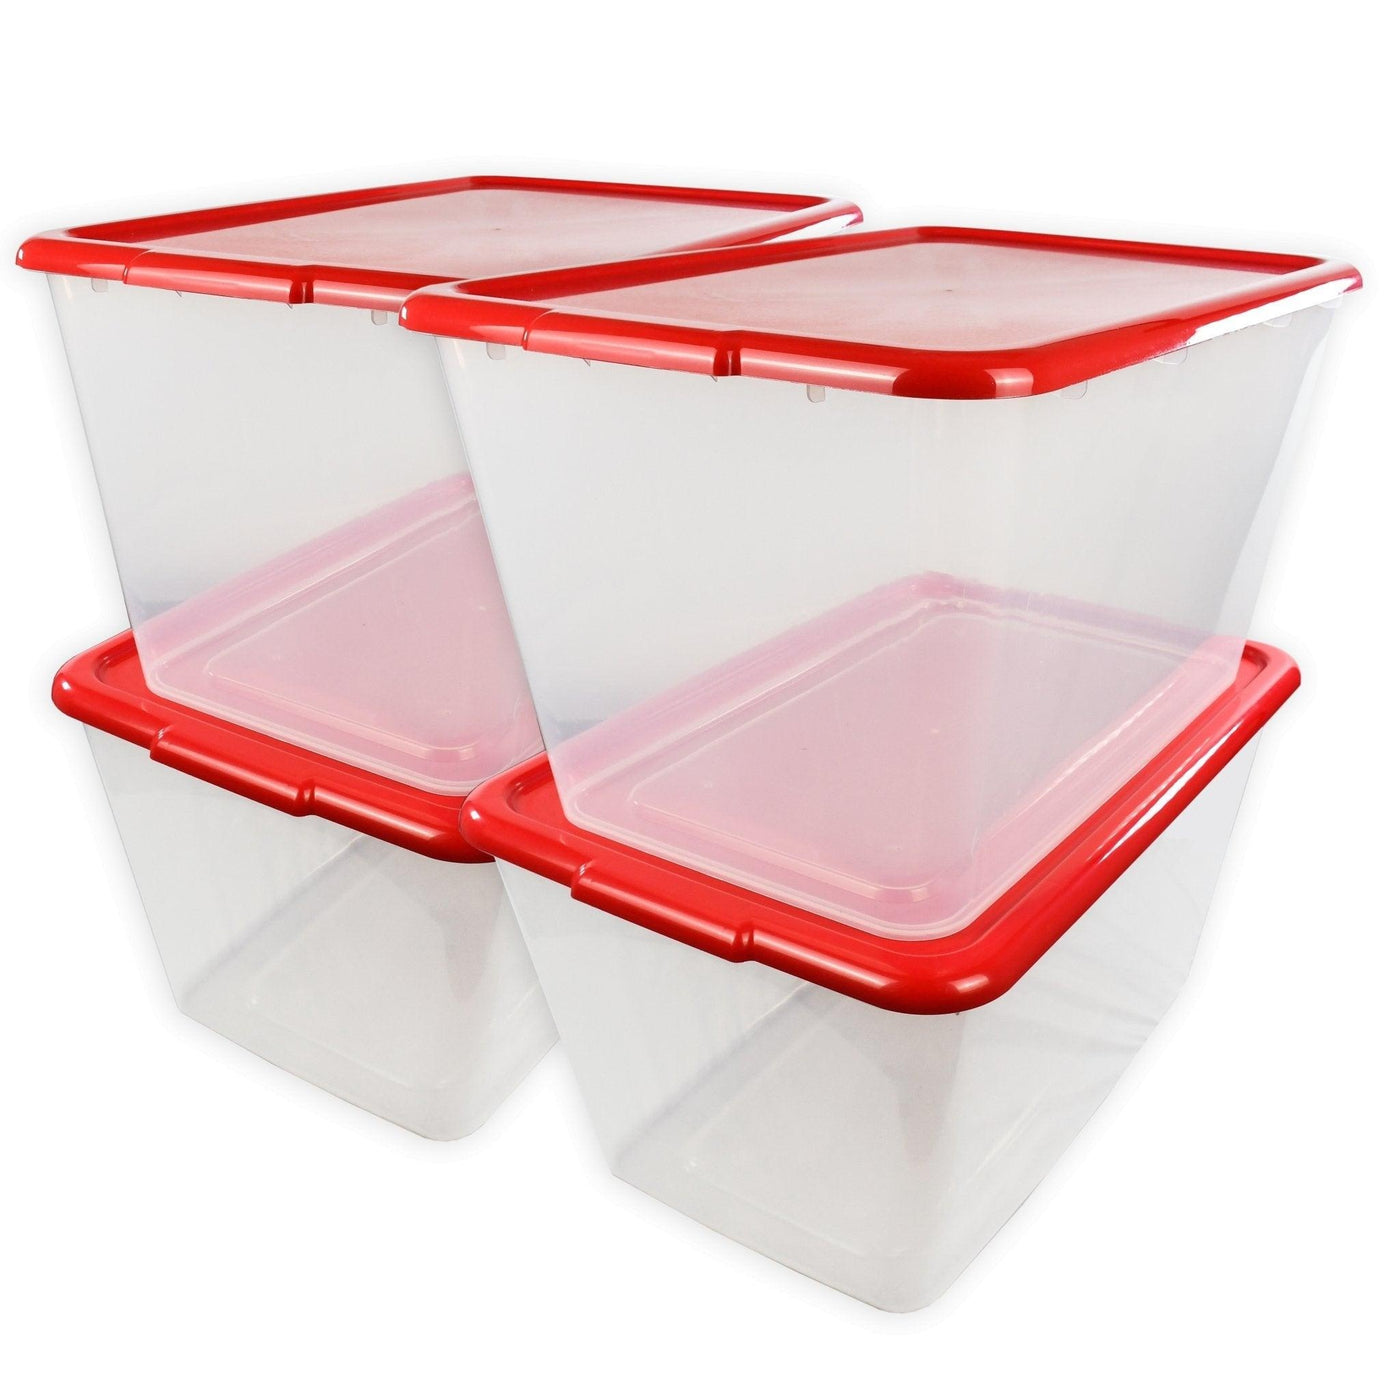 SimplyKleen 14.5-gal. Reusable Stacking Plastic Storage Containers Clear with Lids, 9 Color Options(Pack of 4)